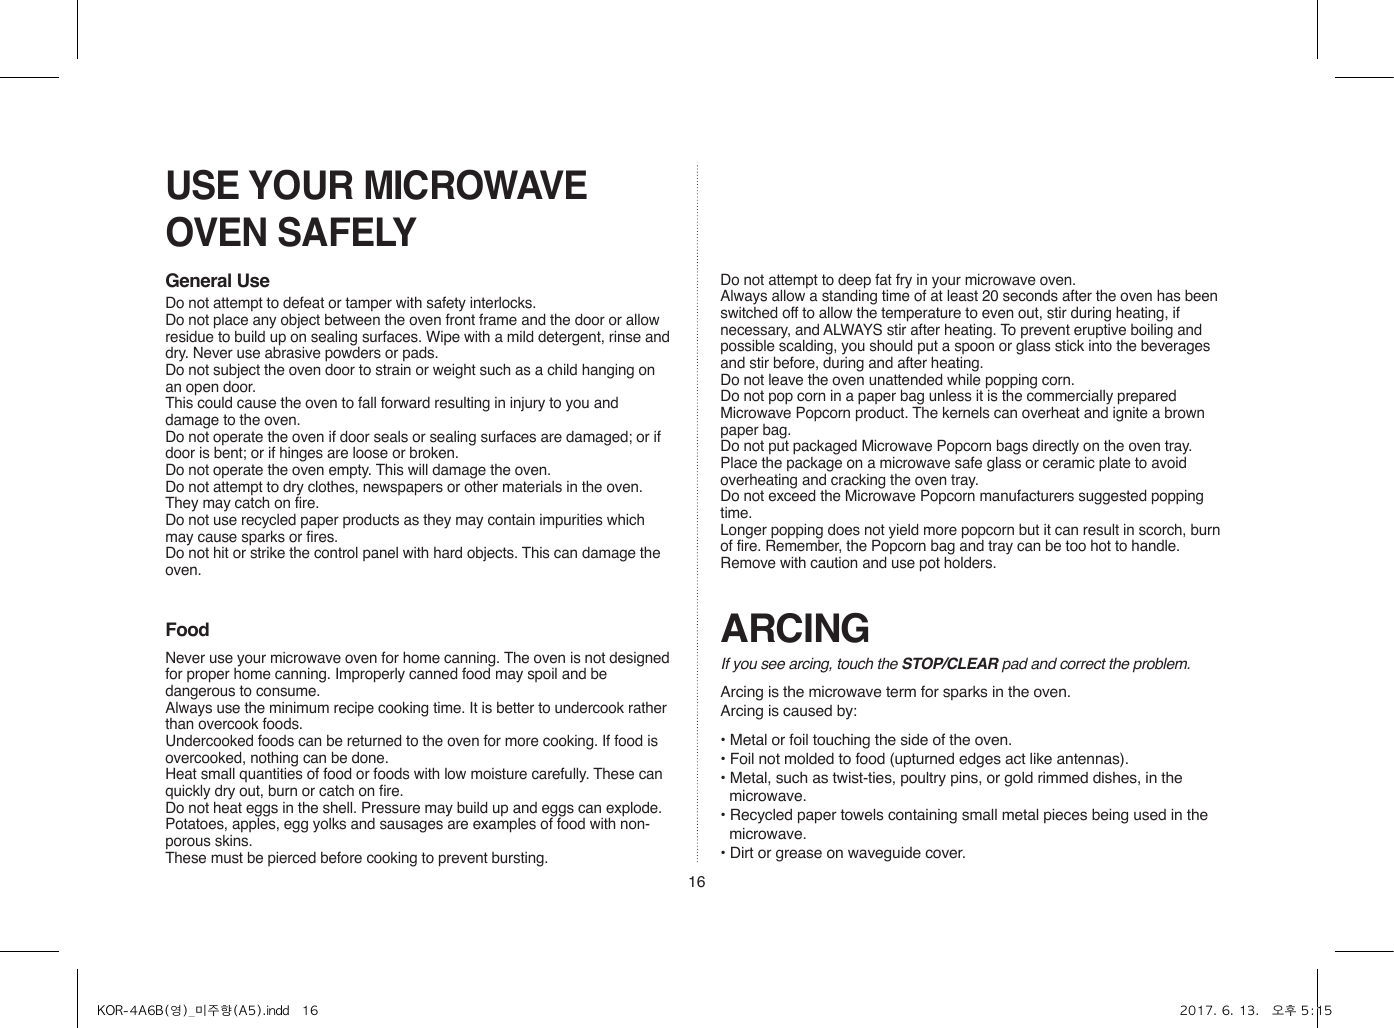 16USE YOUR MICROWAVE OVEN SAFELYGeneral UseFood ARCINGIf you see arcing, touch the STOP/CLEAR pad and correct the problem.Arcing is the microwave term for sparks in the oven.Arcing is caused by:• Metal or foil touching the side of the oven.• Foil not molded to food (upturned edges act like antennas).• Metal, such as twist-ties, poultry pins, or gold rimmed dishes, in the microwave.• Recycled paper towels containing small metal pieces being used in the microwave.• Dirt or grease on waveguide cover.Do not attempt to defeat or tamper with safety interlocks.Do not place any object between the oven front frame and the door or allow residue to build up on sealing surfaces. Wipe with a mild detergent, rinse and dry. Never use abrasive powders or pads.Do not subject the oven door to strain or weight such as a child hanging on an open door.This could cause the oven to fall forward resulting in injury to you and damage to the oven.Do not operate the oven if door seals or sealing surfaces are damaged; or if door is bent; or if hinges are loose or broken.Do not operate the oven empty. This will damage the oven.Do not attempt to dry clothes, newspapers or other materials in the oven. They may catch on fire.Do not use recycled paper products as they may contain impurities which may cause sparks or fires.Do not hit or strike the control panel with hard objects. This can damage the oven.Never use your microwave oven for home canning. The oven is not designed for proper home canning. Improperly canned food may spoil and be dangerous to consume.Always use the minimum recipe cooking time. It is better to undercook rather than overcook foods. Undercooked foods can be returned to the oven for more cooking. If food is overcooked, nothing can be done.Heat small quantities of food or foods with low moisture carefully. These can quickly dry out, burn or catch on fire.Do not heat eggs in the shell. Pressure may build up and eggs can explode.Potatoes, apples, egg yolks and sausages are examples of food with non-porous skins.These must be pierced before cooking to prevent bursting.Do not attempt to deep fat fry in your microwave oven.Always allow a standing time of at least 20 seconds after the oven has been switched off to allow the temperature to even out, stir during heating, if necessary, and ALWAYS stir after heating. To prevent eruptive boiling and possible scalding, you should put a spoon or glass stick into the beverages and stir before, during and after heating.Do not leave the oven unattended while popping corn.Do not pop corn in a paper bag unless it is the commercially prepared Microwave Popcorn product. The kernels can overheat and ignite a brown paper bag.Do not put packaged Microwave Popcorn bags directly on the oven tray. Place the package on a microwave safe glass or ceramic plate to avoid overheating and cracking the oven tray.Do not exceed the Microwave Popcorn manufacturers suggested popping time. Longer popping does not yield more popcorn but it can result in scorch, burn of fire. Remember, the Popcorn bag and tray can be too hot to handle. Remove with caution and use pot holders.KOR-4A6B(영)_미주향(A5).indd   16 2017. 6. 13.   오후 5:15